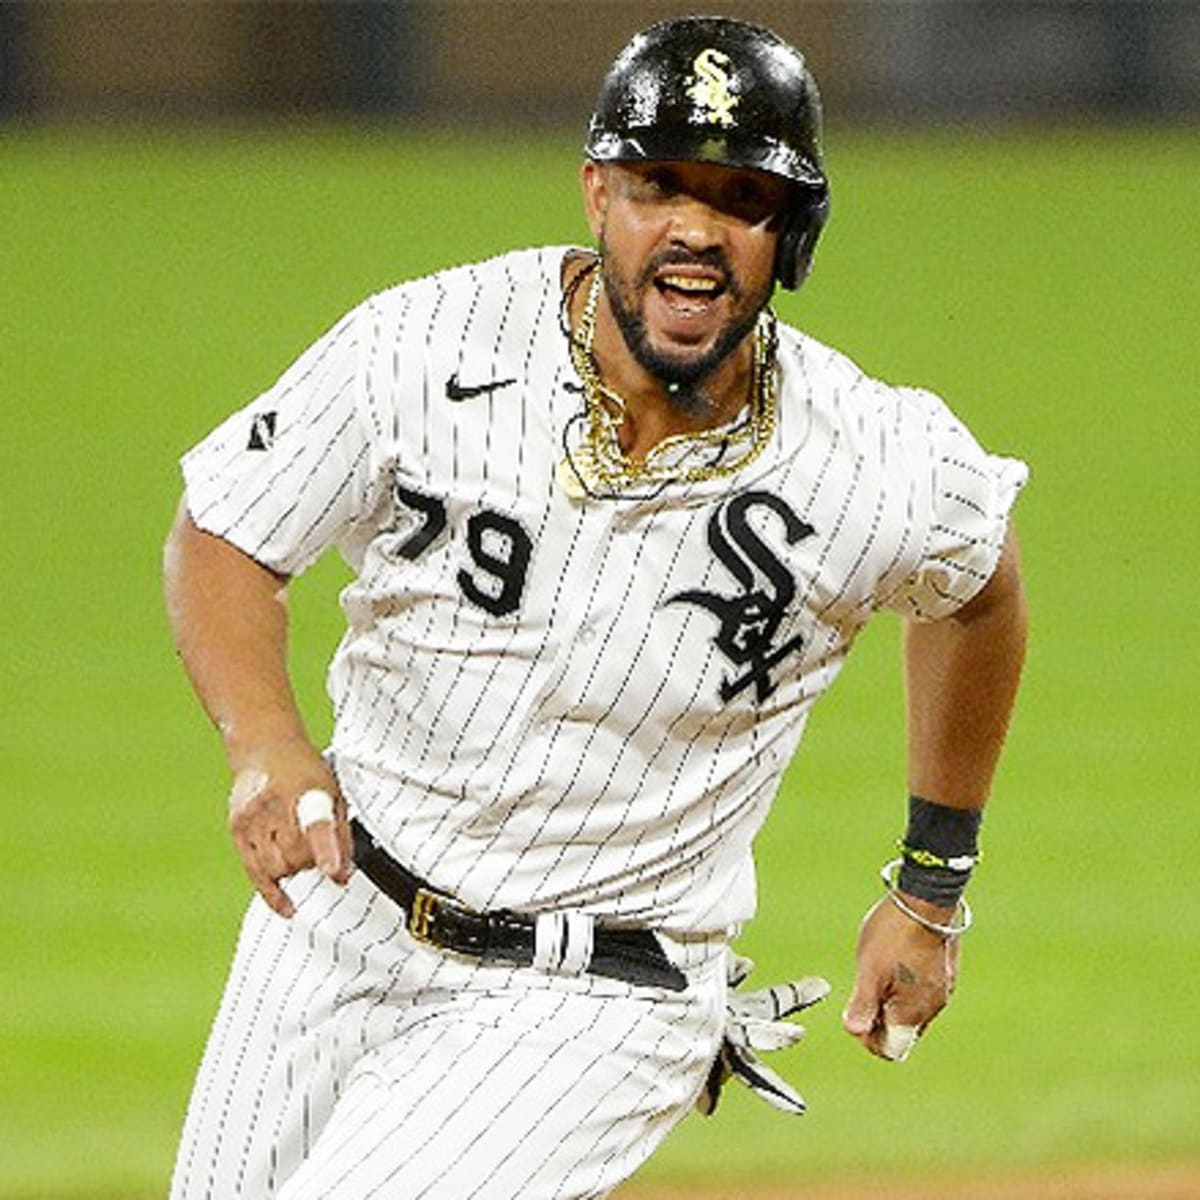 Is Leury Garcia's roster spot with the Chicago White Sox in